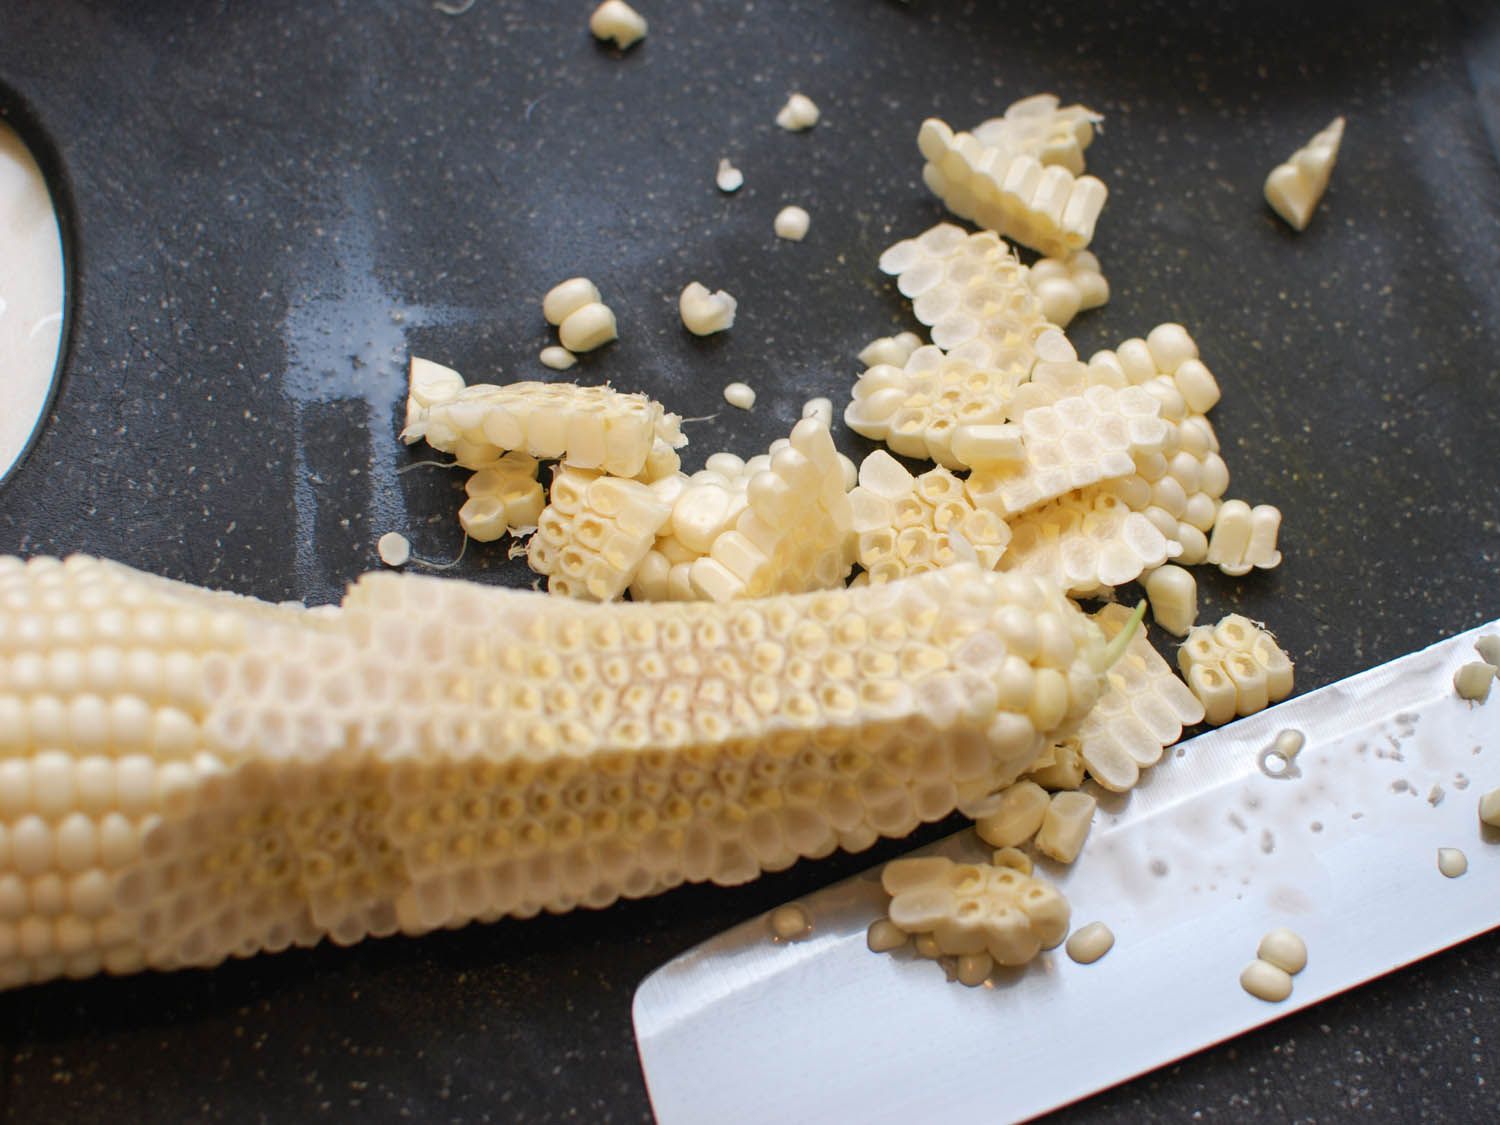 Cutting sweet corn off the cob with a chef's knife.